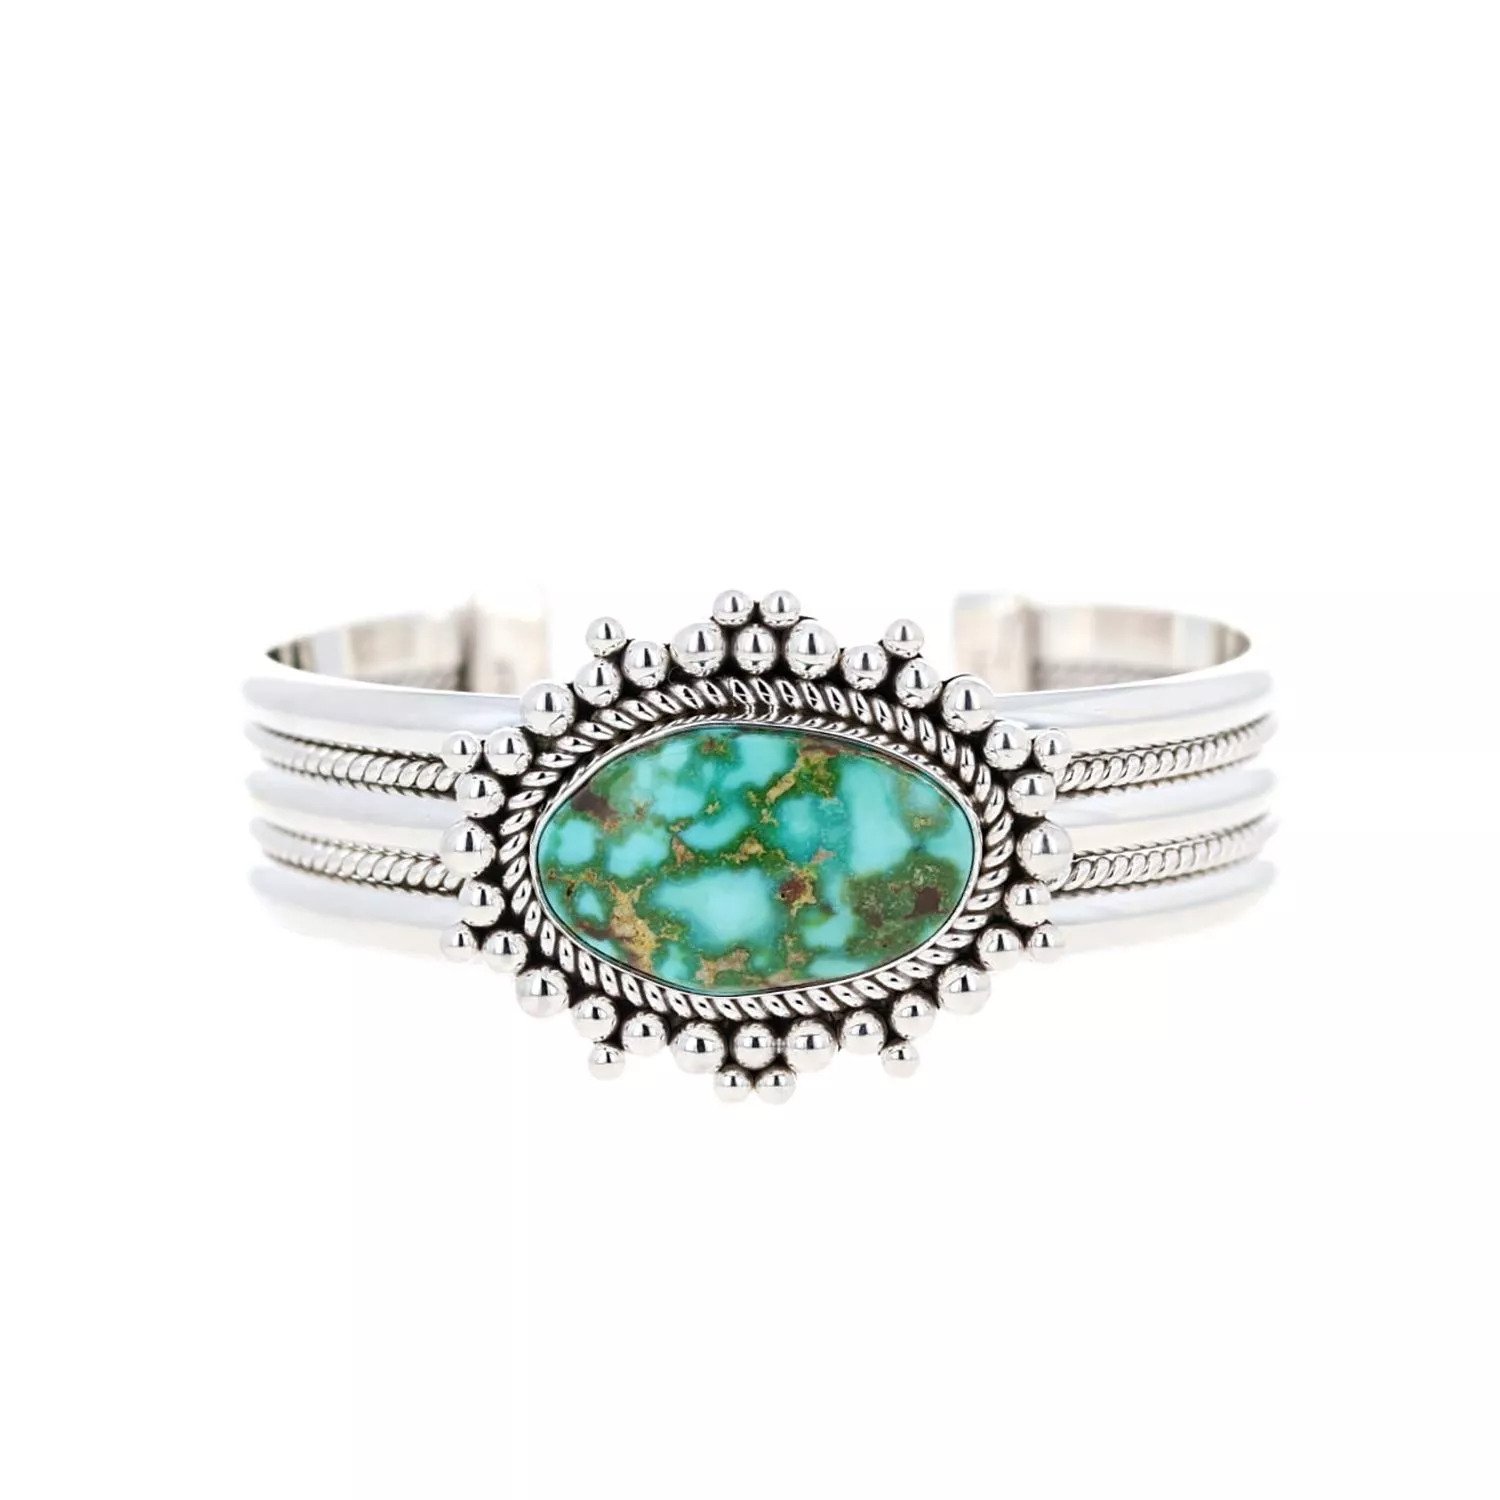 Sonoran Turquoise Oval Cuff, $795